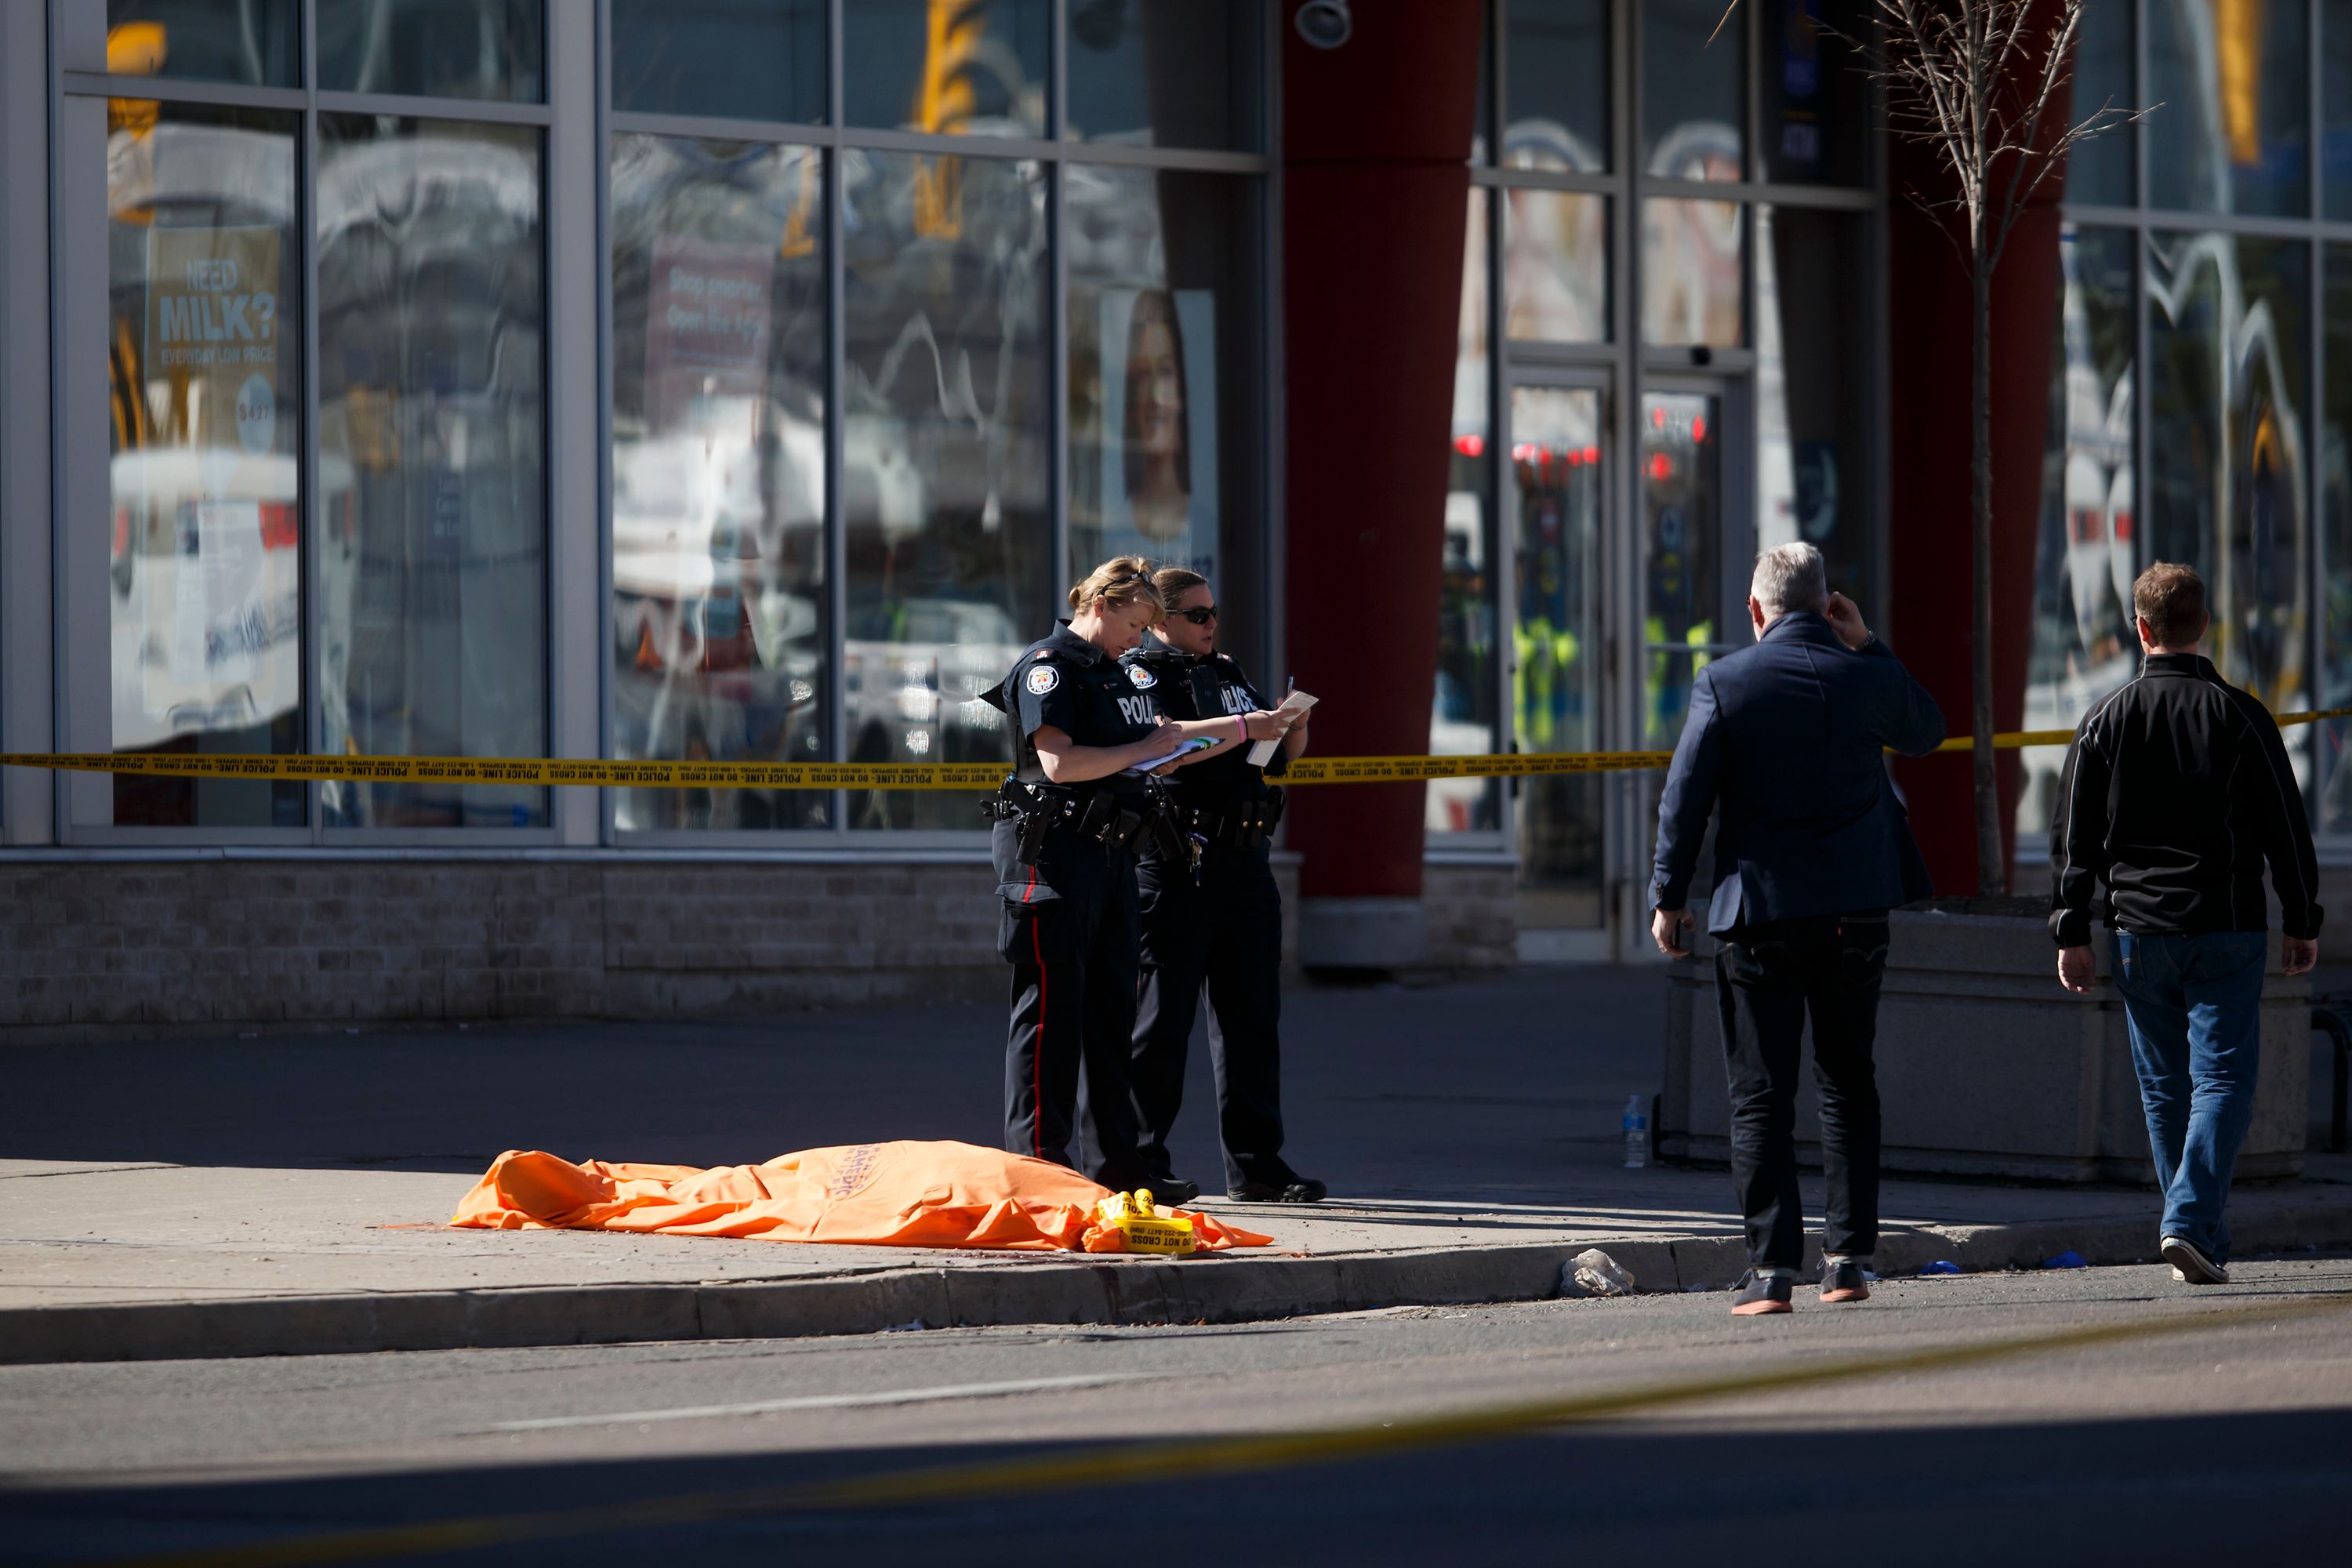 An unidentified body at the scene after a van plowed into pedestrians on April 23, 2018